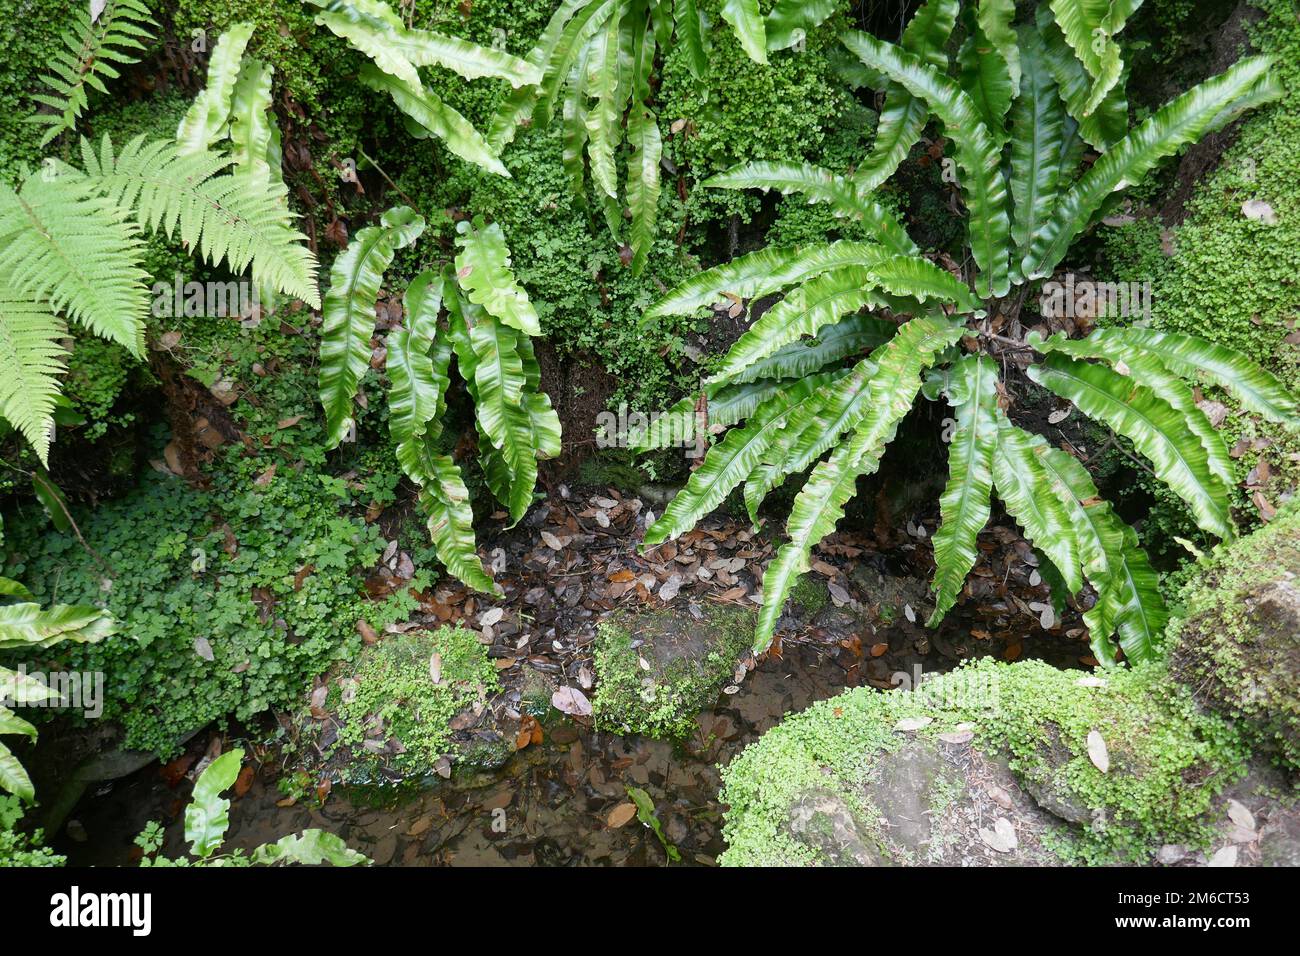 Ferns and liverworts plants in wet environment Stock Photo